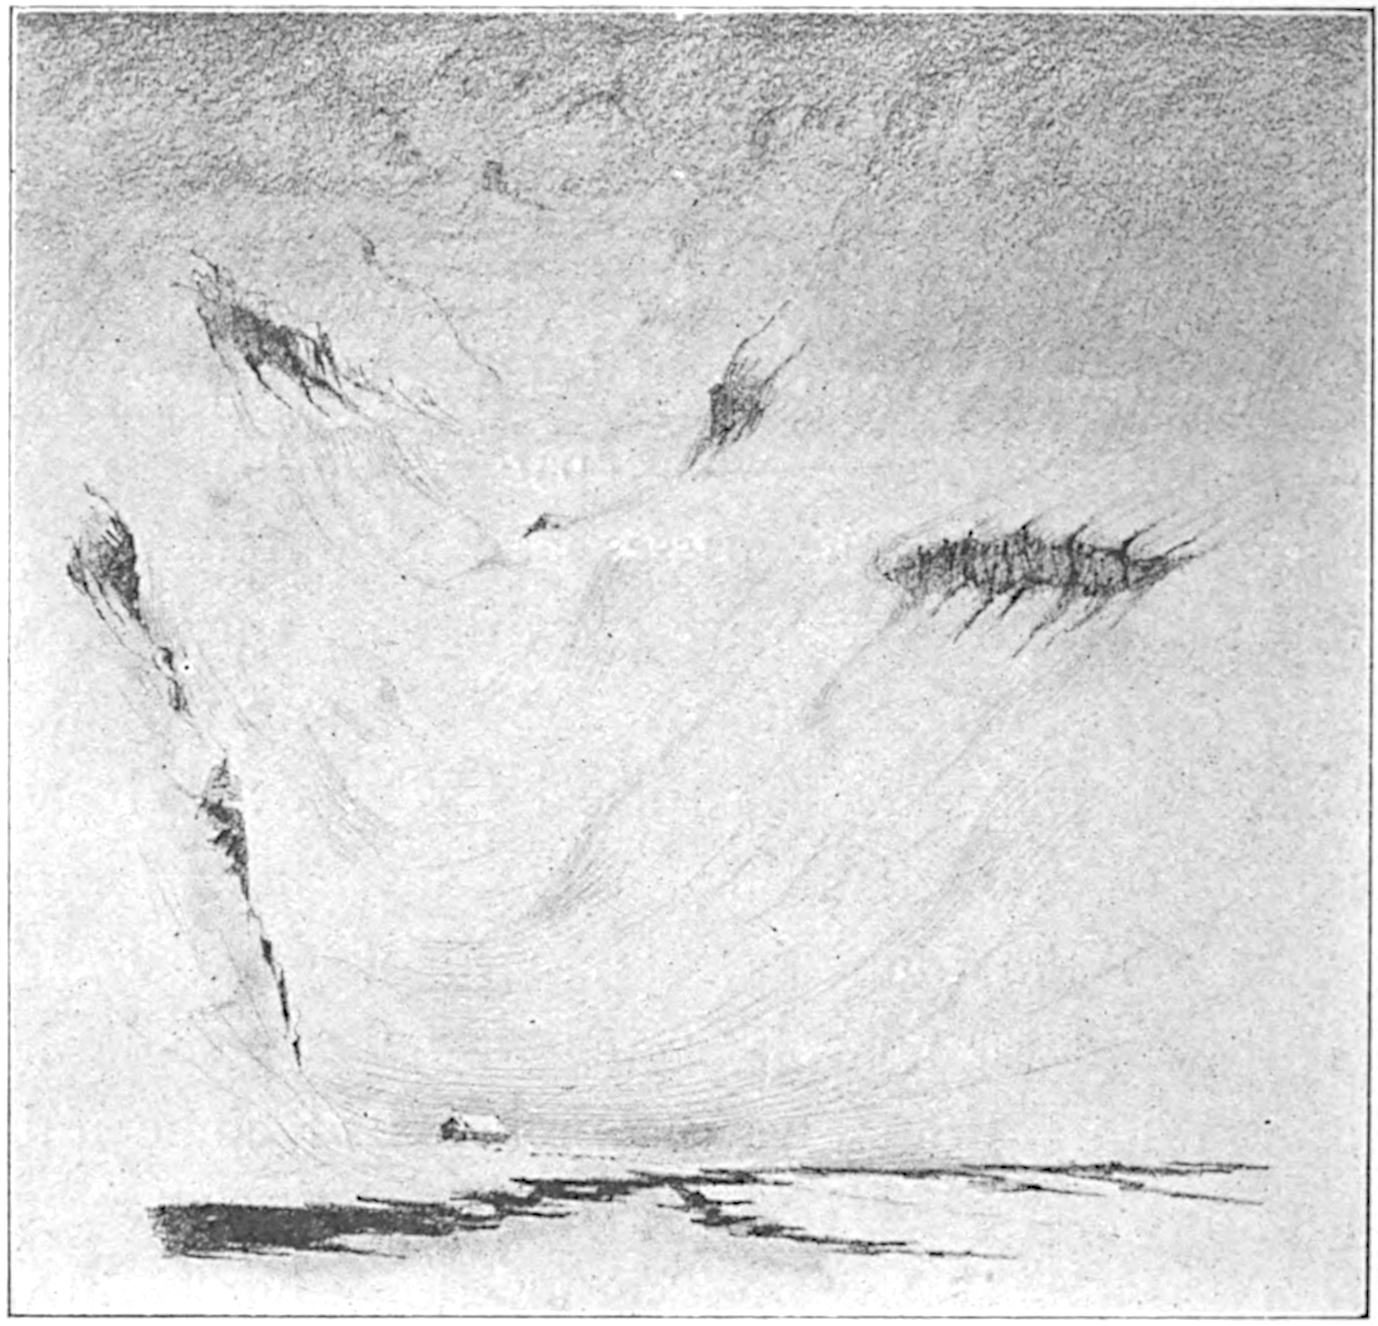 Sketch showing outlines of several mountains with grey shading obscuring most of the view. A small building stands in the distance on the bottom slightly left of center.